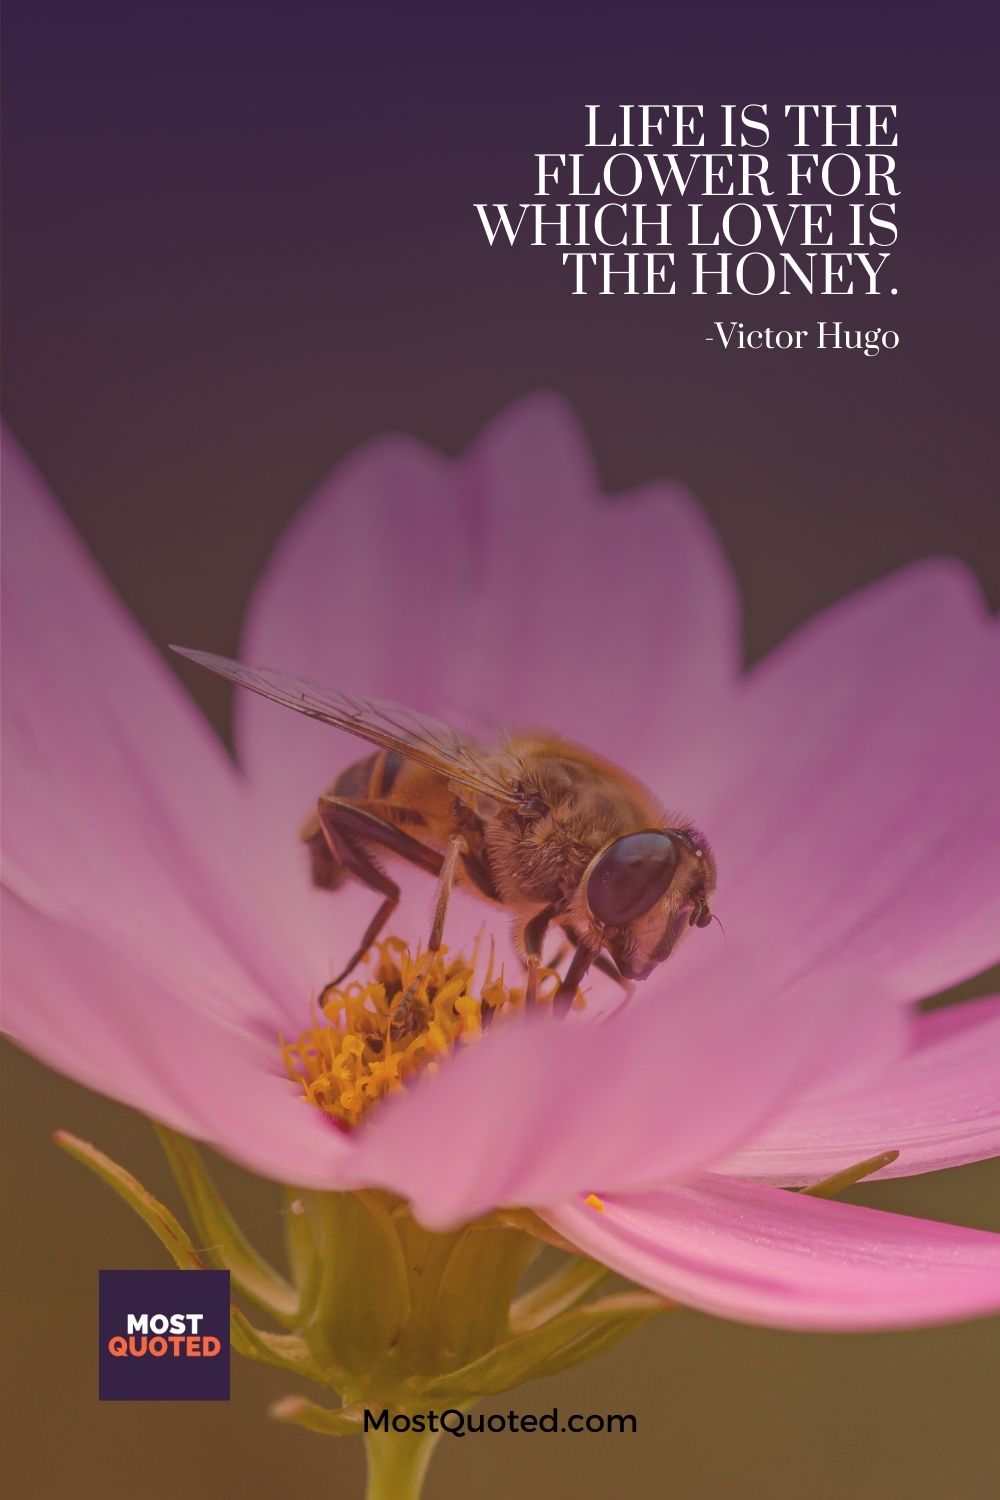 Life is the flower for which love is the honey. - Victor Hugo